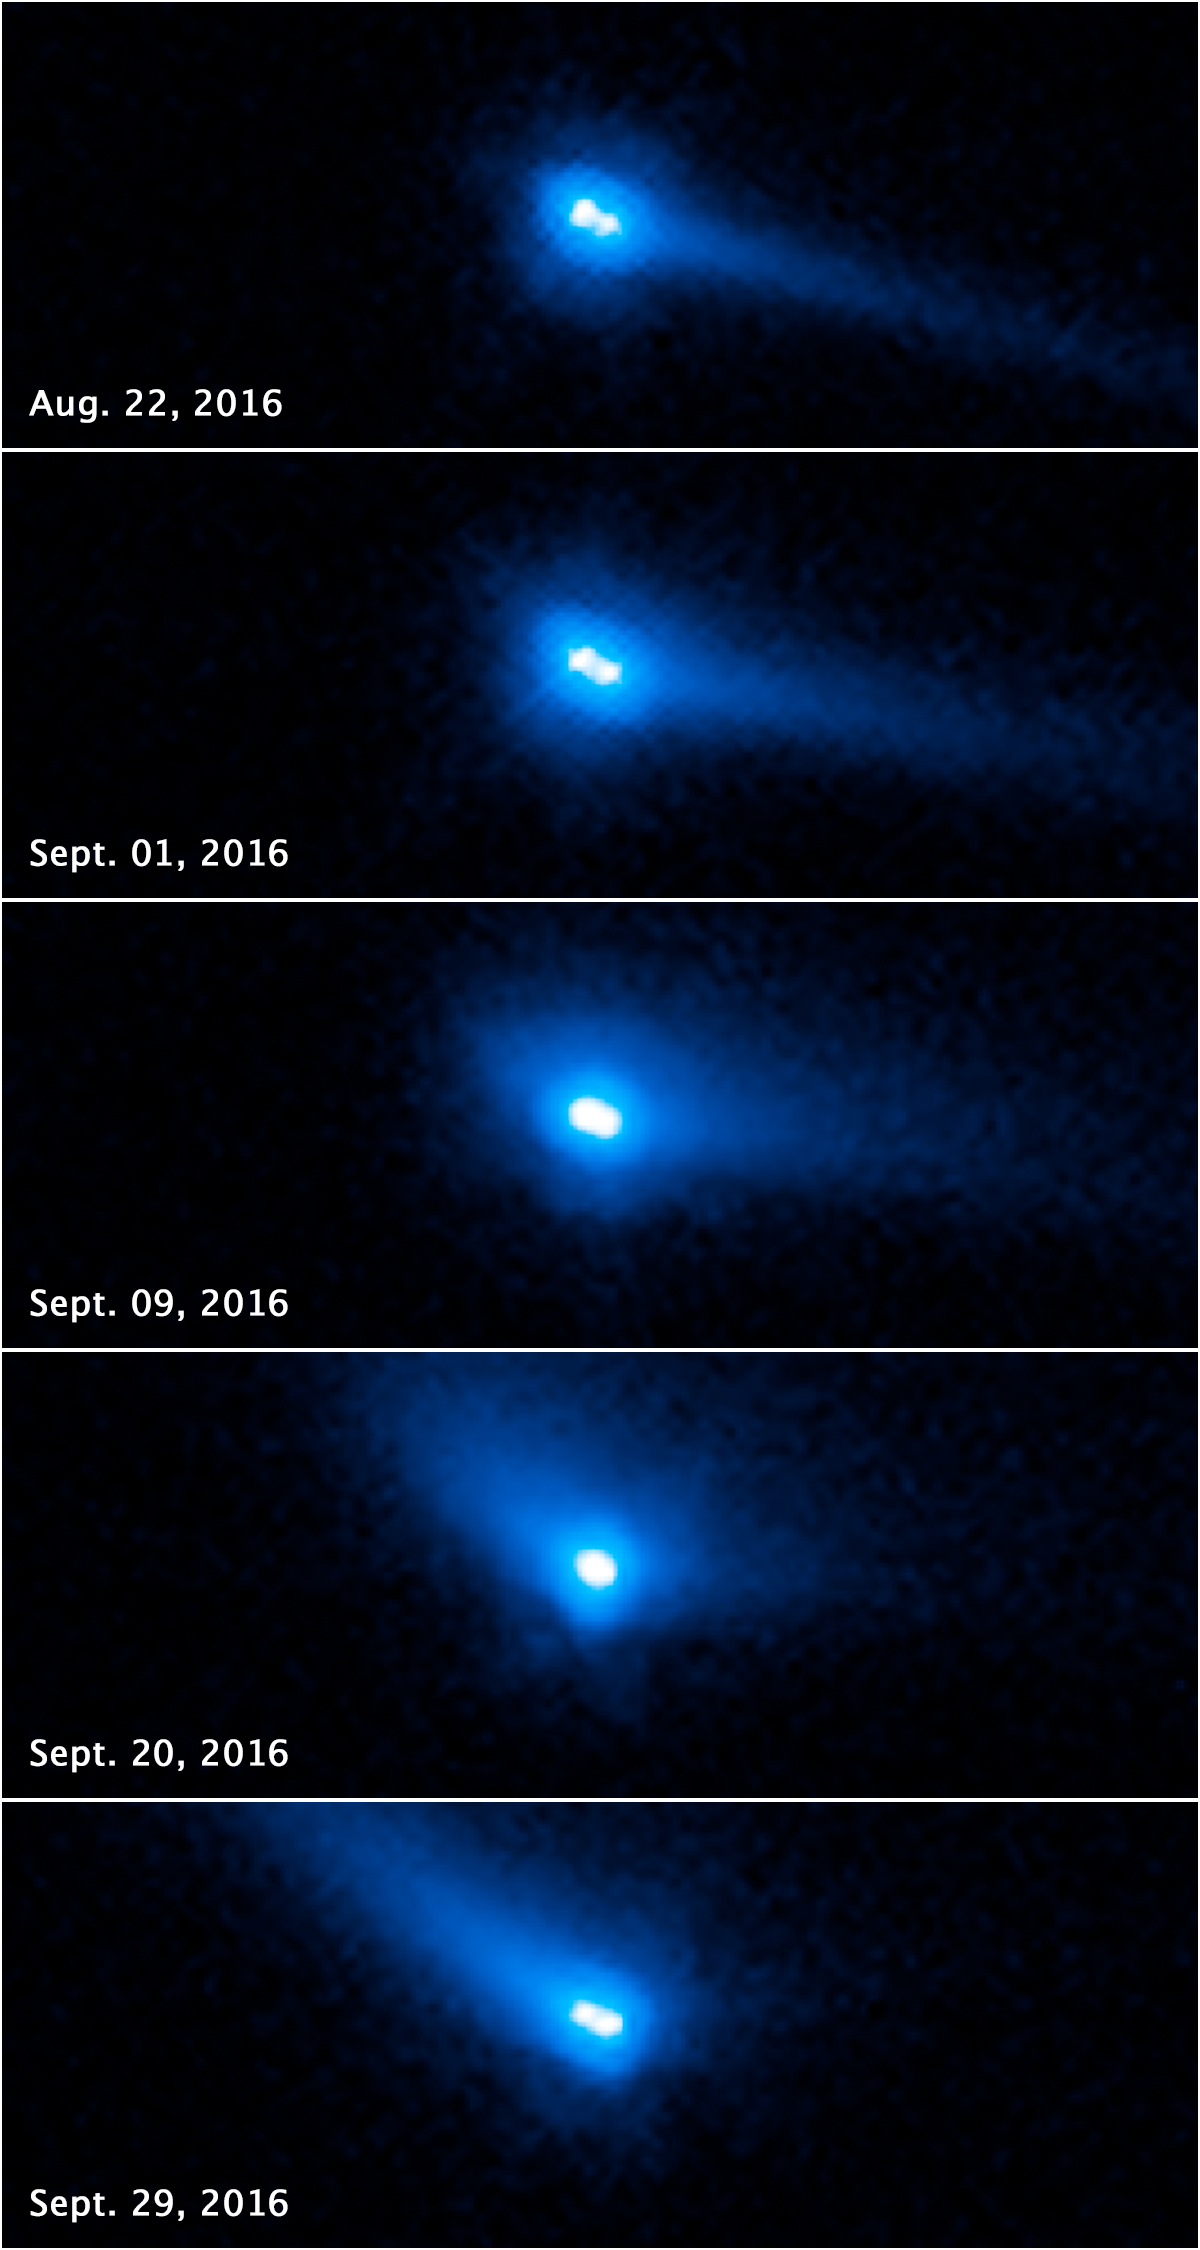 Five, rectangular images stacked on top of each other. Each image holds two bright-white points surrounded by blue gas with a blue tail.